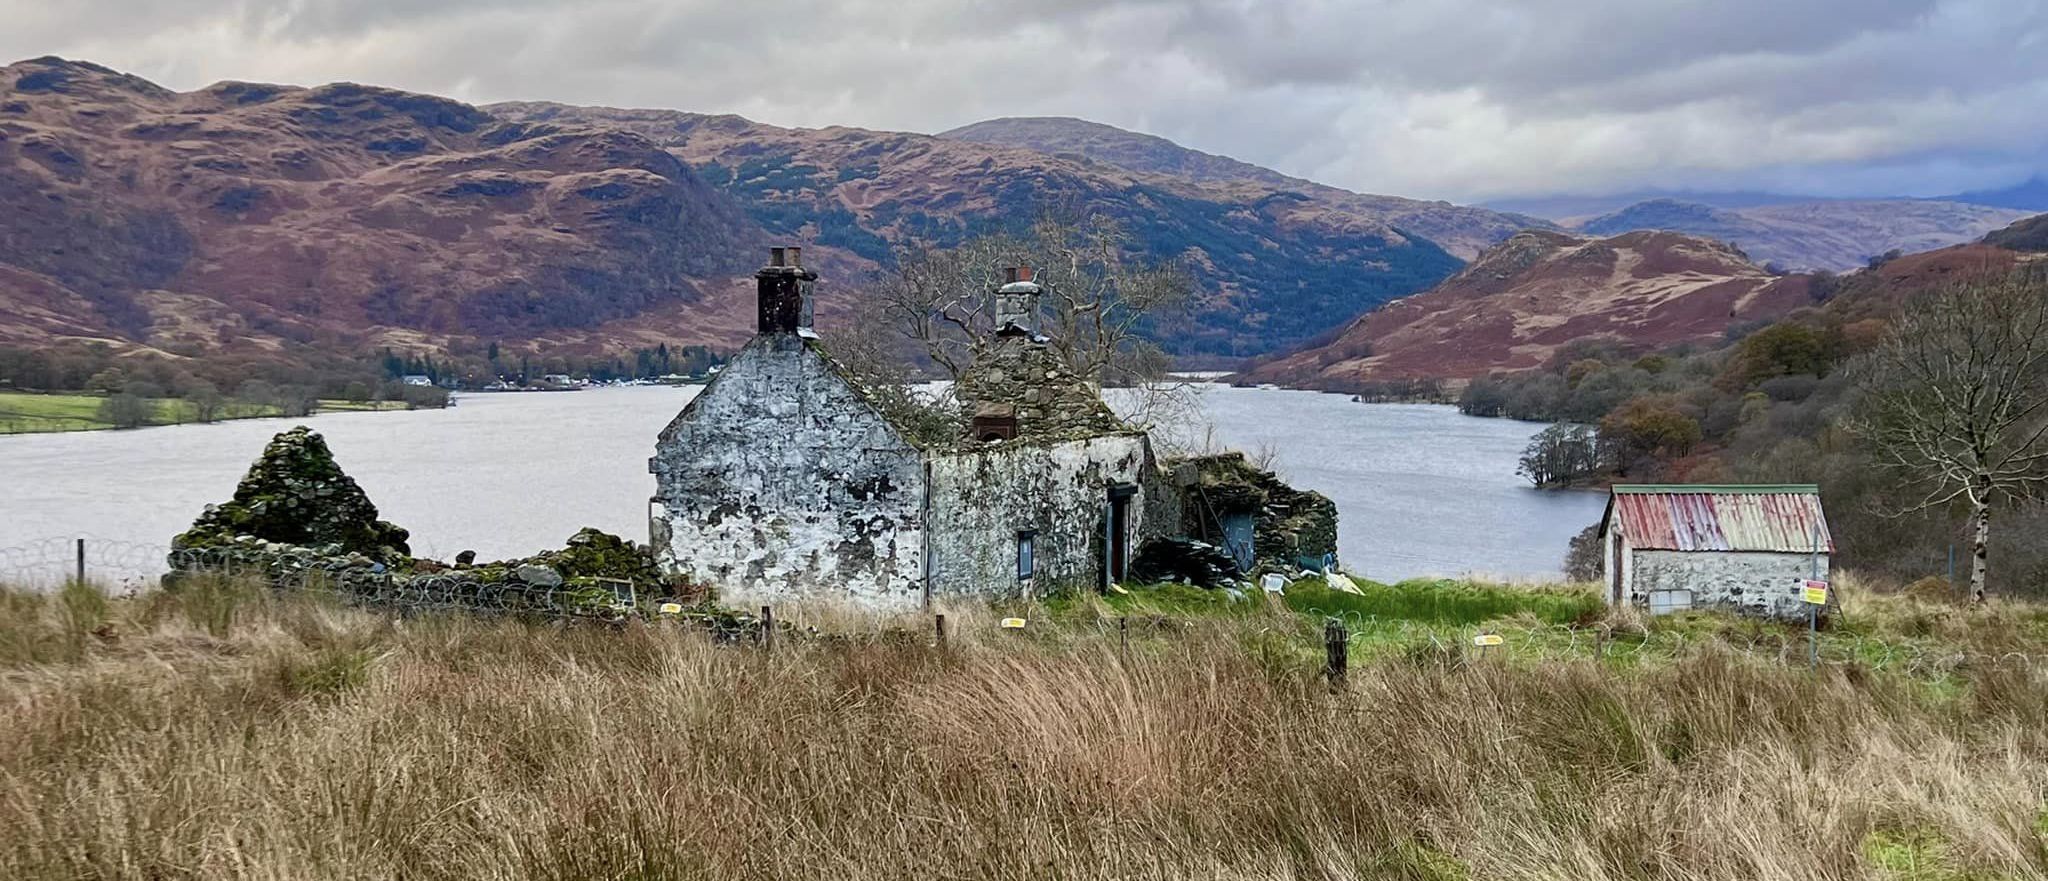 Bothy at Doune on Loch Lomond on route to Beinglas